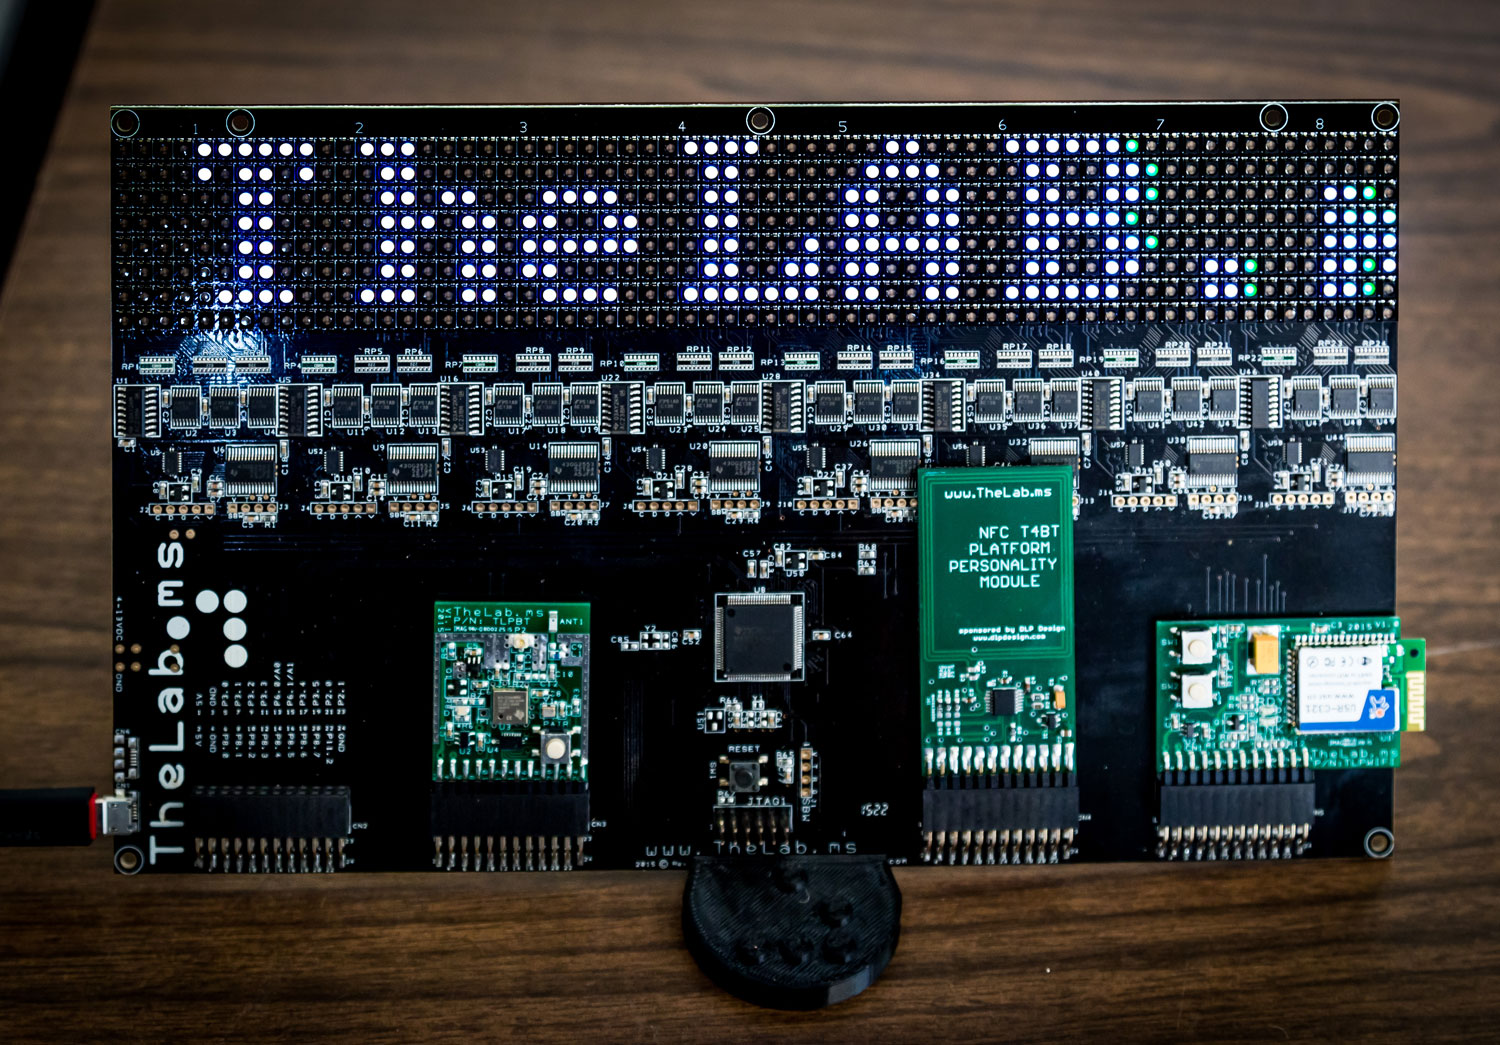 THELAB-MS-DIGITAL-MAKERSPACE-PLANO-MAGAZINE-TAP-WEARABLE-ELECTRONIC